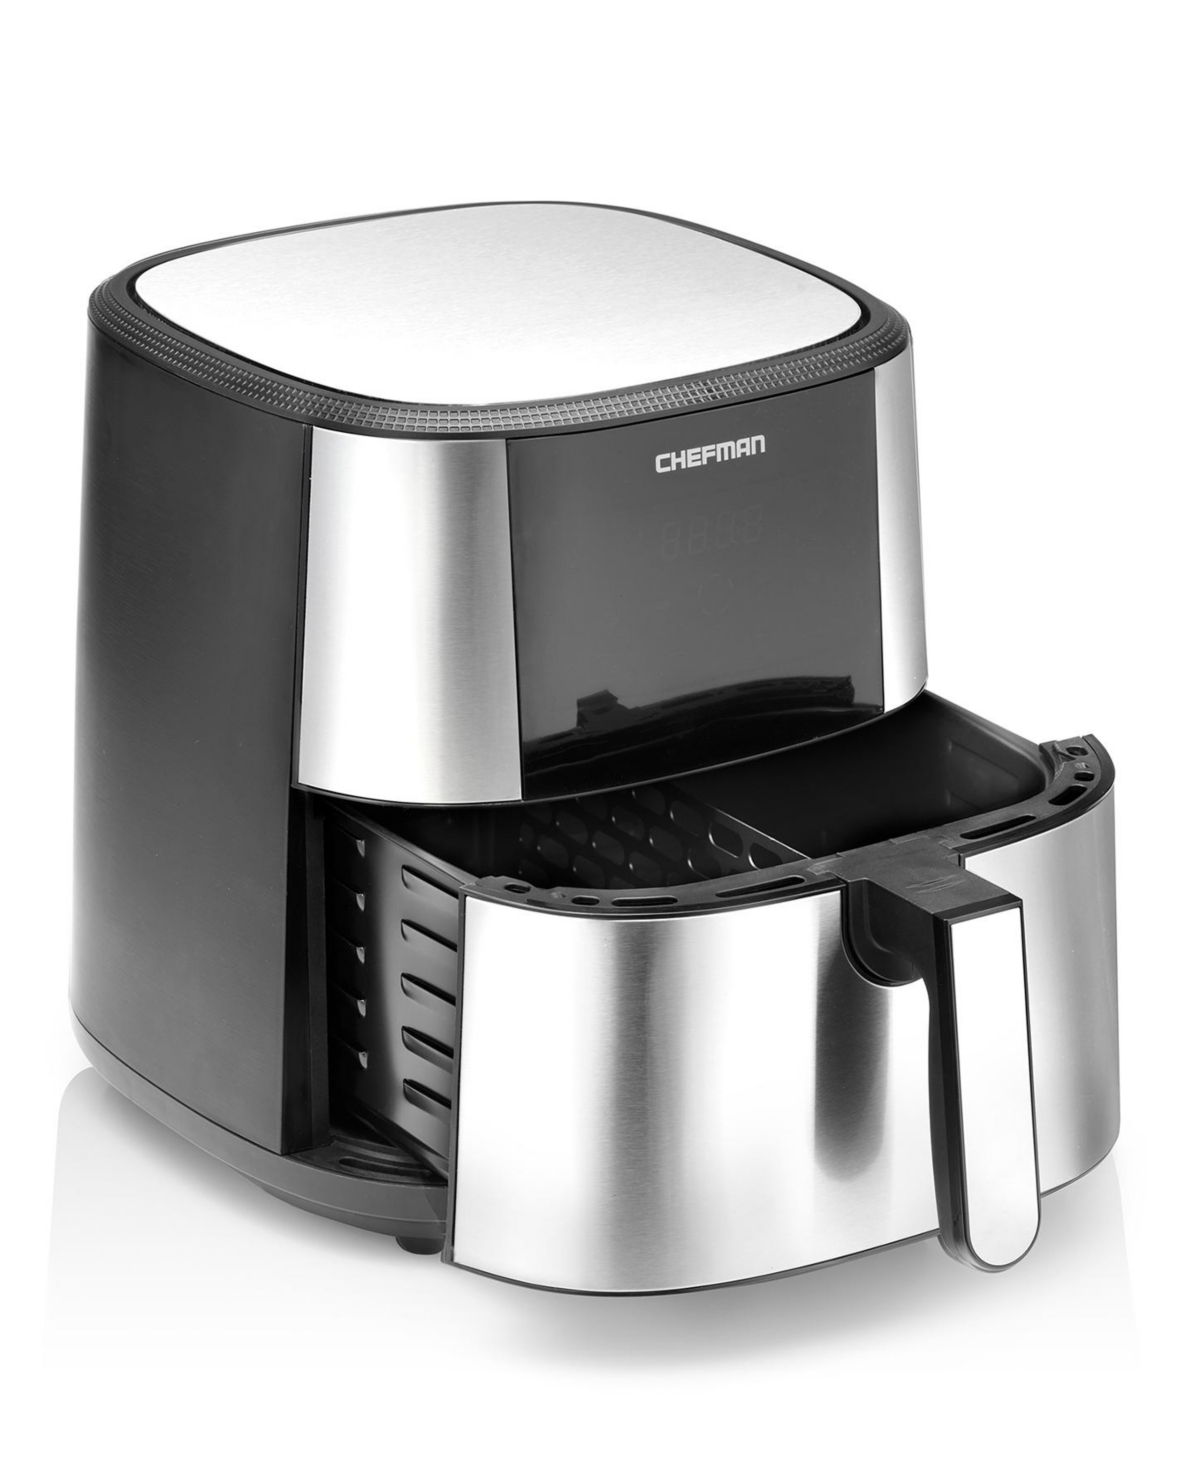 Chefman 8 Quart Extra Large Digital With Temperature Probe Air Fryer In Stainless Steel